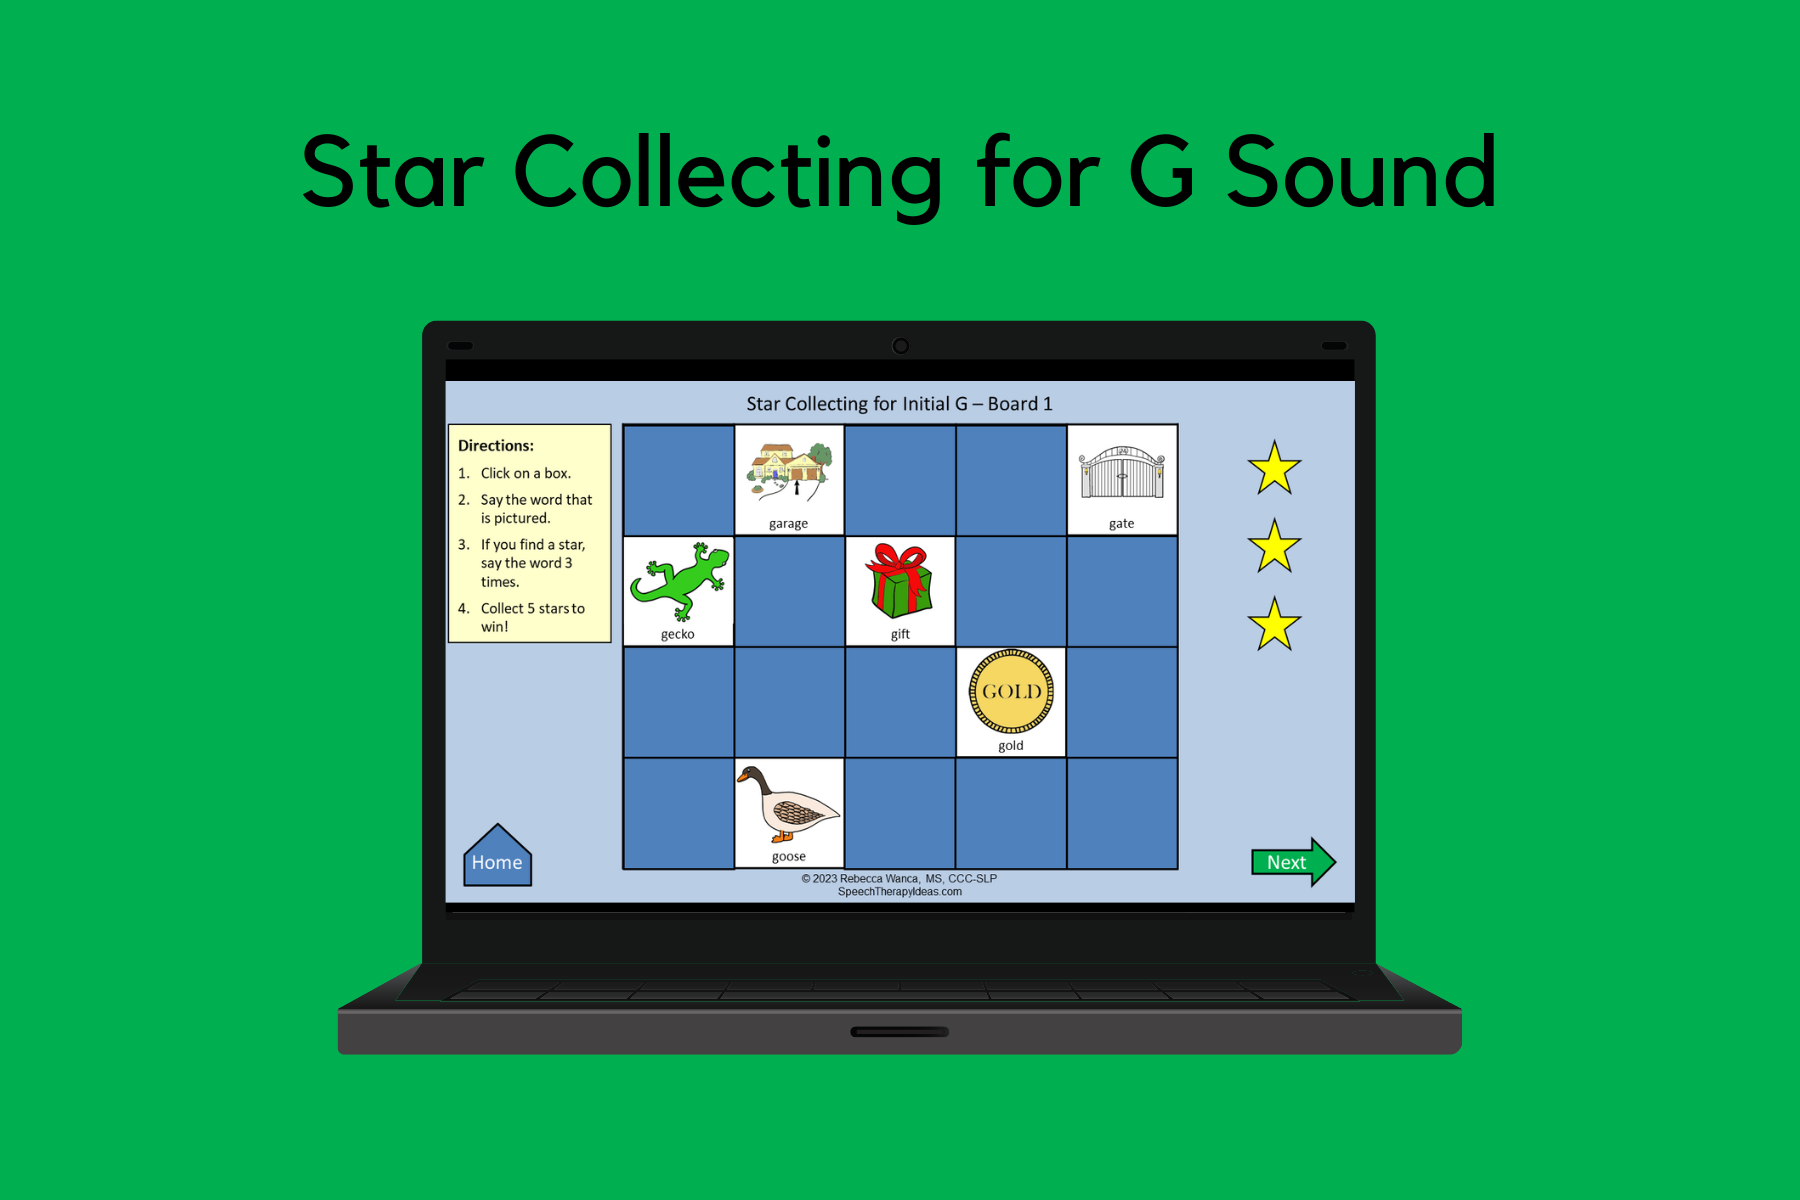 Star Collecting for G Sound